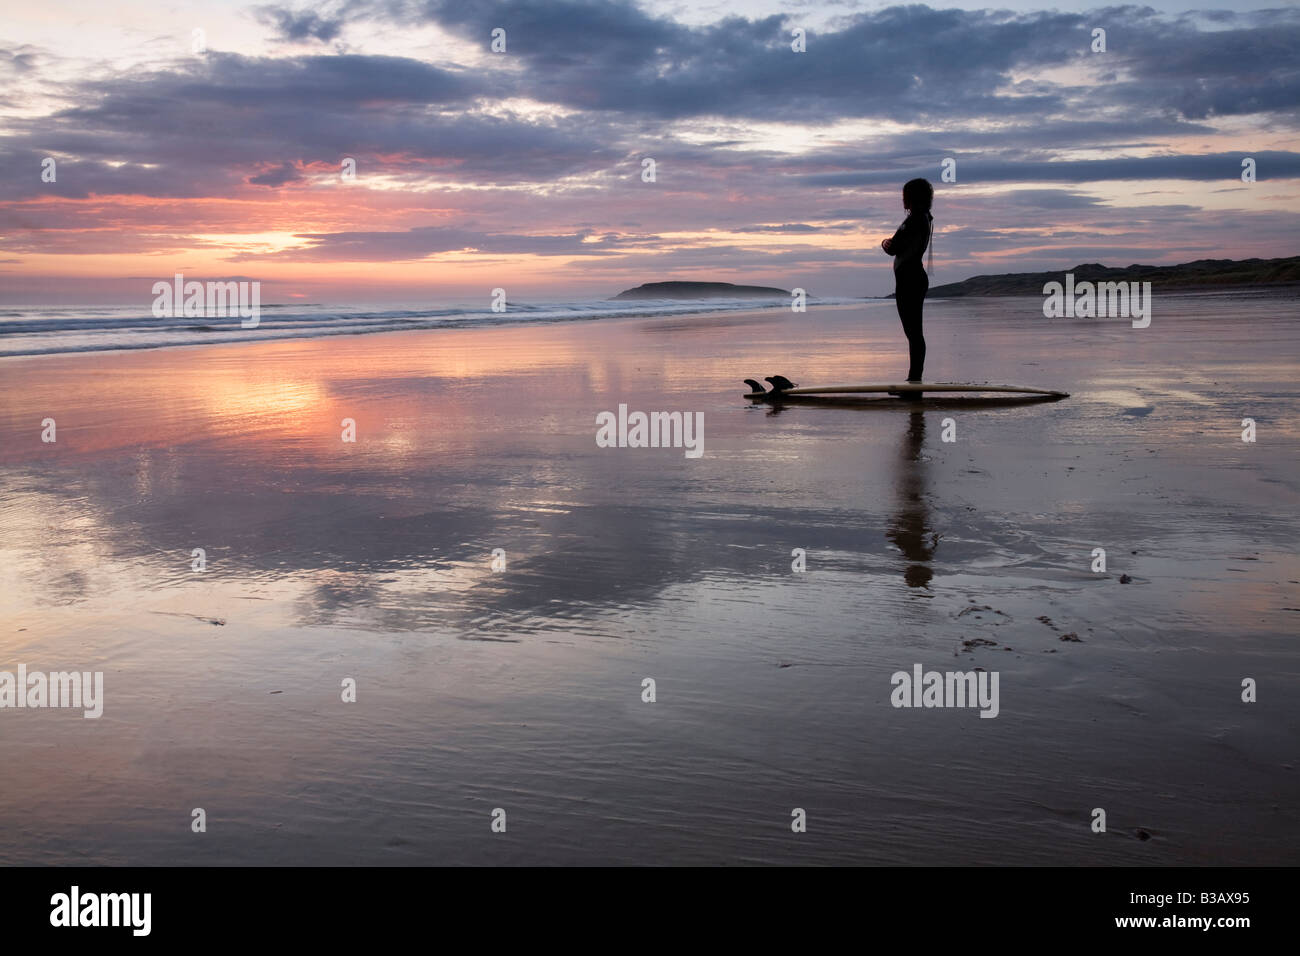 One woman surfer standing in silhouette on beach at sunset with reflections of sunset and clouds in the sand Stock Photo